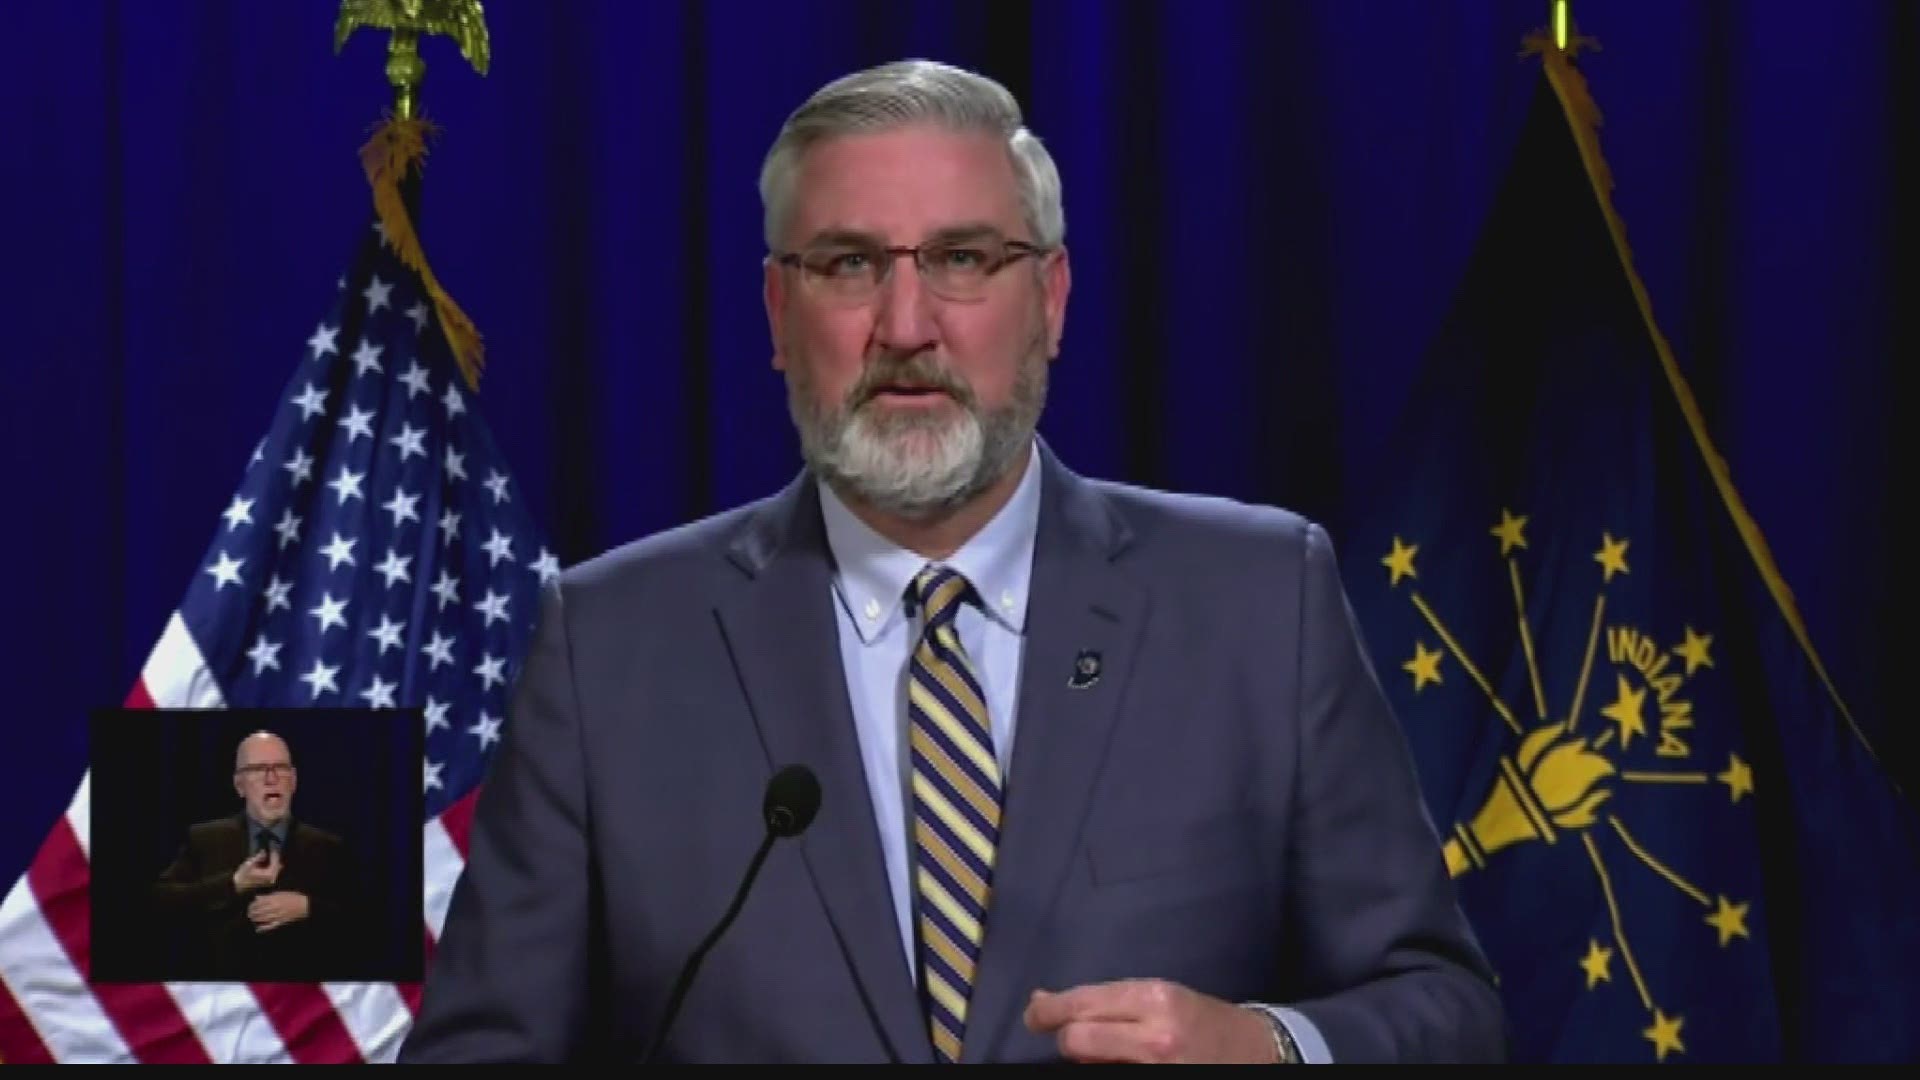 Gov. Holcomb laid out a 2021 agenda in Tuesday's State of the State address.